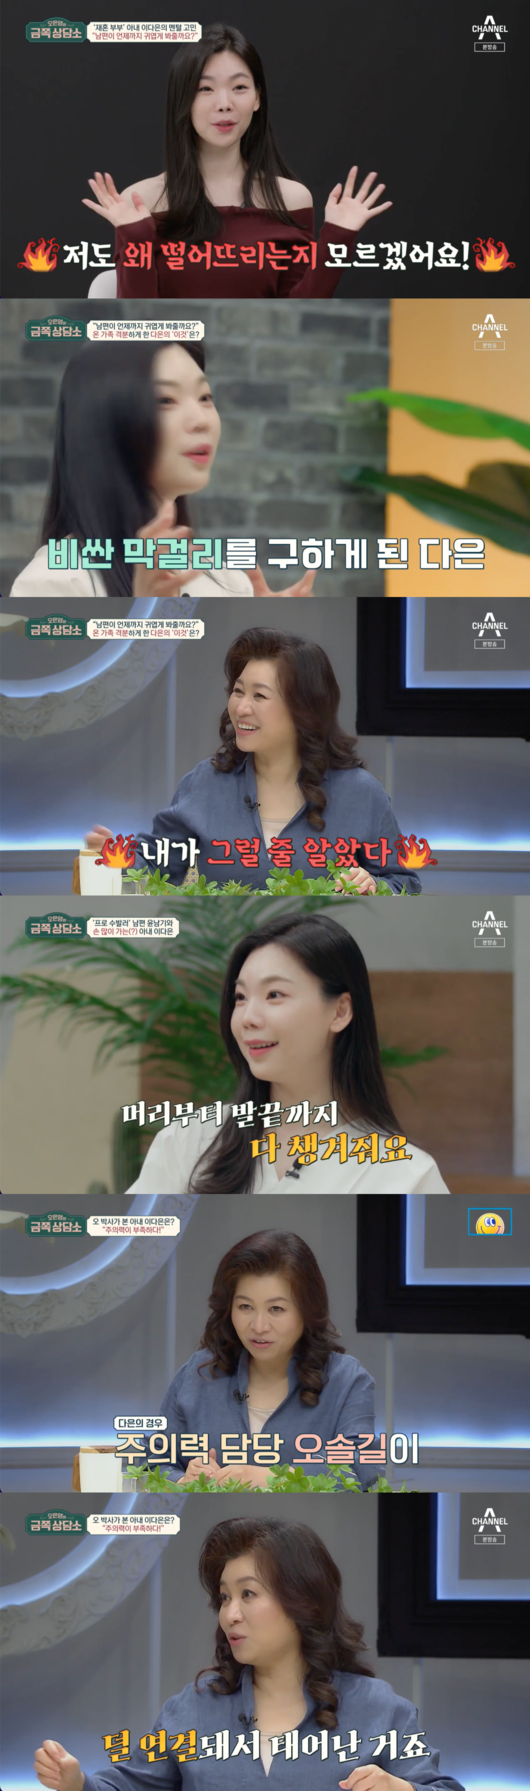 Oh Eun-youngs Gold Counseling Center Oh Eun Young diagnosed Lee Da-eun with attentional force shortage.Channel A Oh Eun-youngs Gold Counseling Center, which aired on the afternoon of the 10th, revealed the troubles of Dolsing couple Yoon Nam-ki and Lee Da-eun.When asked what the problem was, Lee Da-eun replied, Fear of failure. How can we keep our remarriage happy?Oh Eun Young said,  (Remarriage counseling) is important. I liked each other and marriage.I did marriage because I liked it, but there is a difficult situation in marriage life, and there is a reason to split up. Lee Da-eun said, I was worried about the nature of the buffet. Lee Da-eun said, Some of the people I met my ex-boyfriend were cute (my) bumper.I opened my gum in the car and fell on the floor and I cant forget the (constant) look, the anecdote said.Asked why he felt like it, Lee Da-eun said, Familys are sick of it. I dont know. Some people spill coffee while carrying bags.Family had been drinking Makgeoli and bought the expensive Makgeoli. I just shook it to follow it. It opened up and exploded. Lee Da-eun said, Ive never met such a person. I care from head to toe.Ill zip them up, and Ill take care of where they went and where they went down. One day Ill take my eyelashes.Yoon Nam-gi once thought, Why is it that Da-eun is? I think its a little urgent, I think, because I want to do two things at the same time.Oh Eun Young said, Its an Attentional Force tribe. People grow and develop as they live. Development is a path in the cerebral brain.At the moment of birth, a footpath is created. It develops along external stimuli.Da-eun was born with a little less connection to the path in charge of the Attentional Force. Oh Eun Young said, I feel like Nam Ki is raising two daughters. Yoon Nam-gi said, I actually told you a joke. Two daughters.There is a trap of blind faith in terms of conditions, Oh Eun Young said. If someone falls in love, they dont see the downside.Oh Eun Young wrote, The burning love between men and women is at least three years long, and after three years, it is not the time when love cools down, but the time when the latent rational love lasts from birth.As time goes by, other love fills in.Capture the screen of Oh Eun-youngs Gold Counseling Center